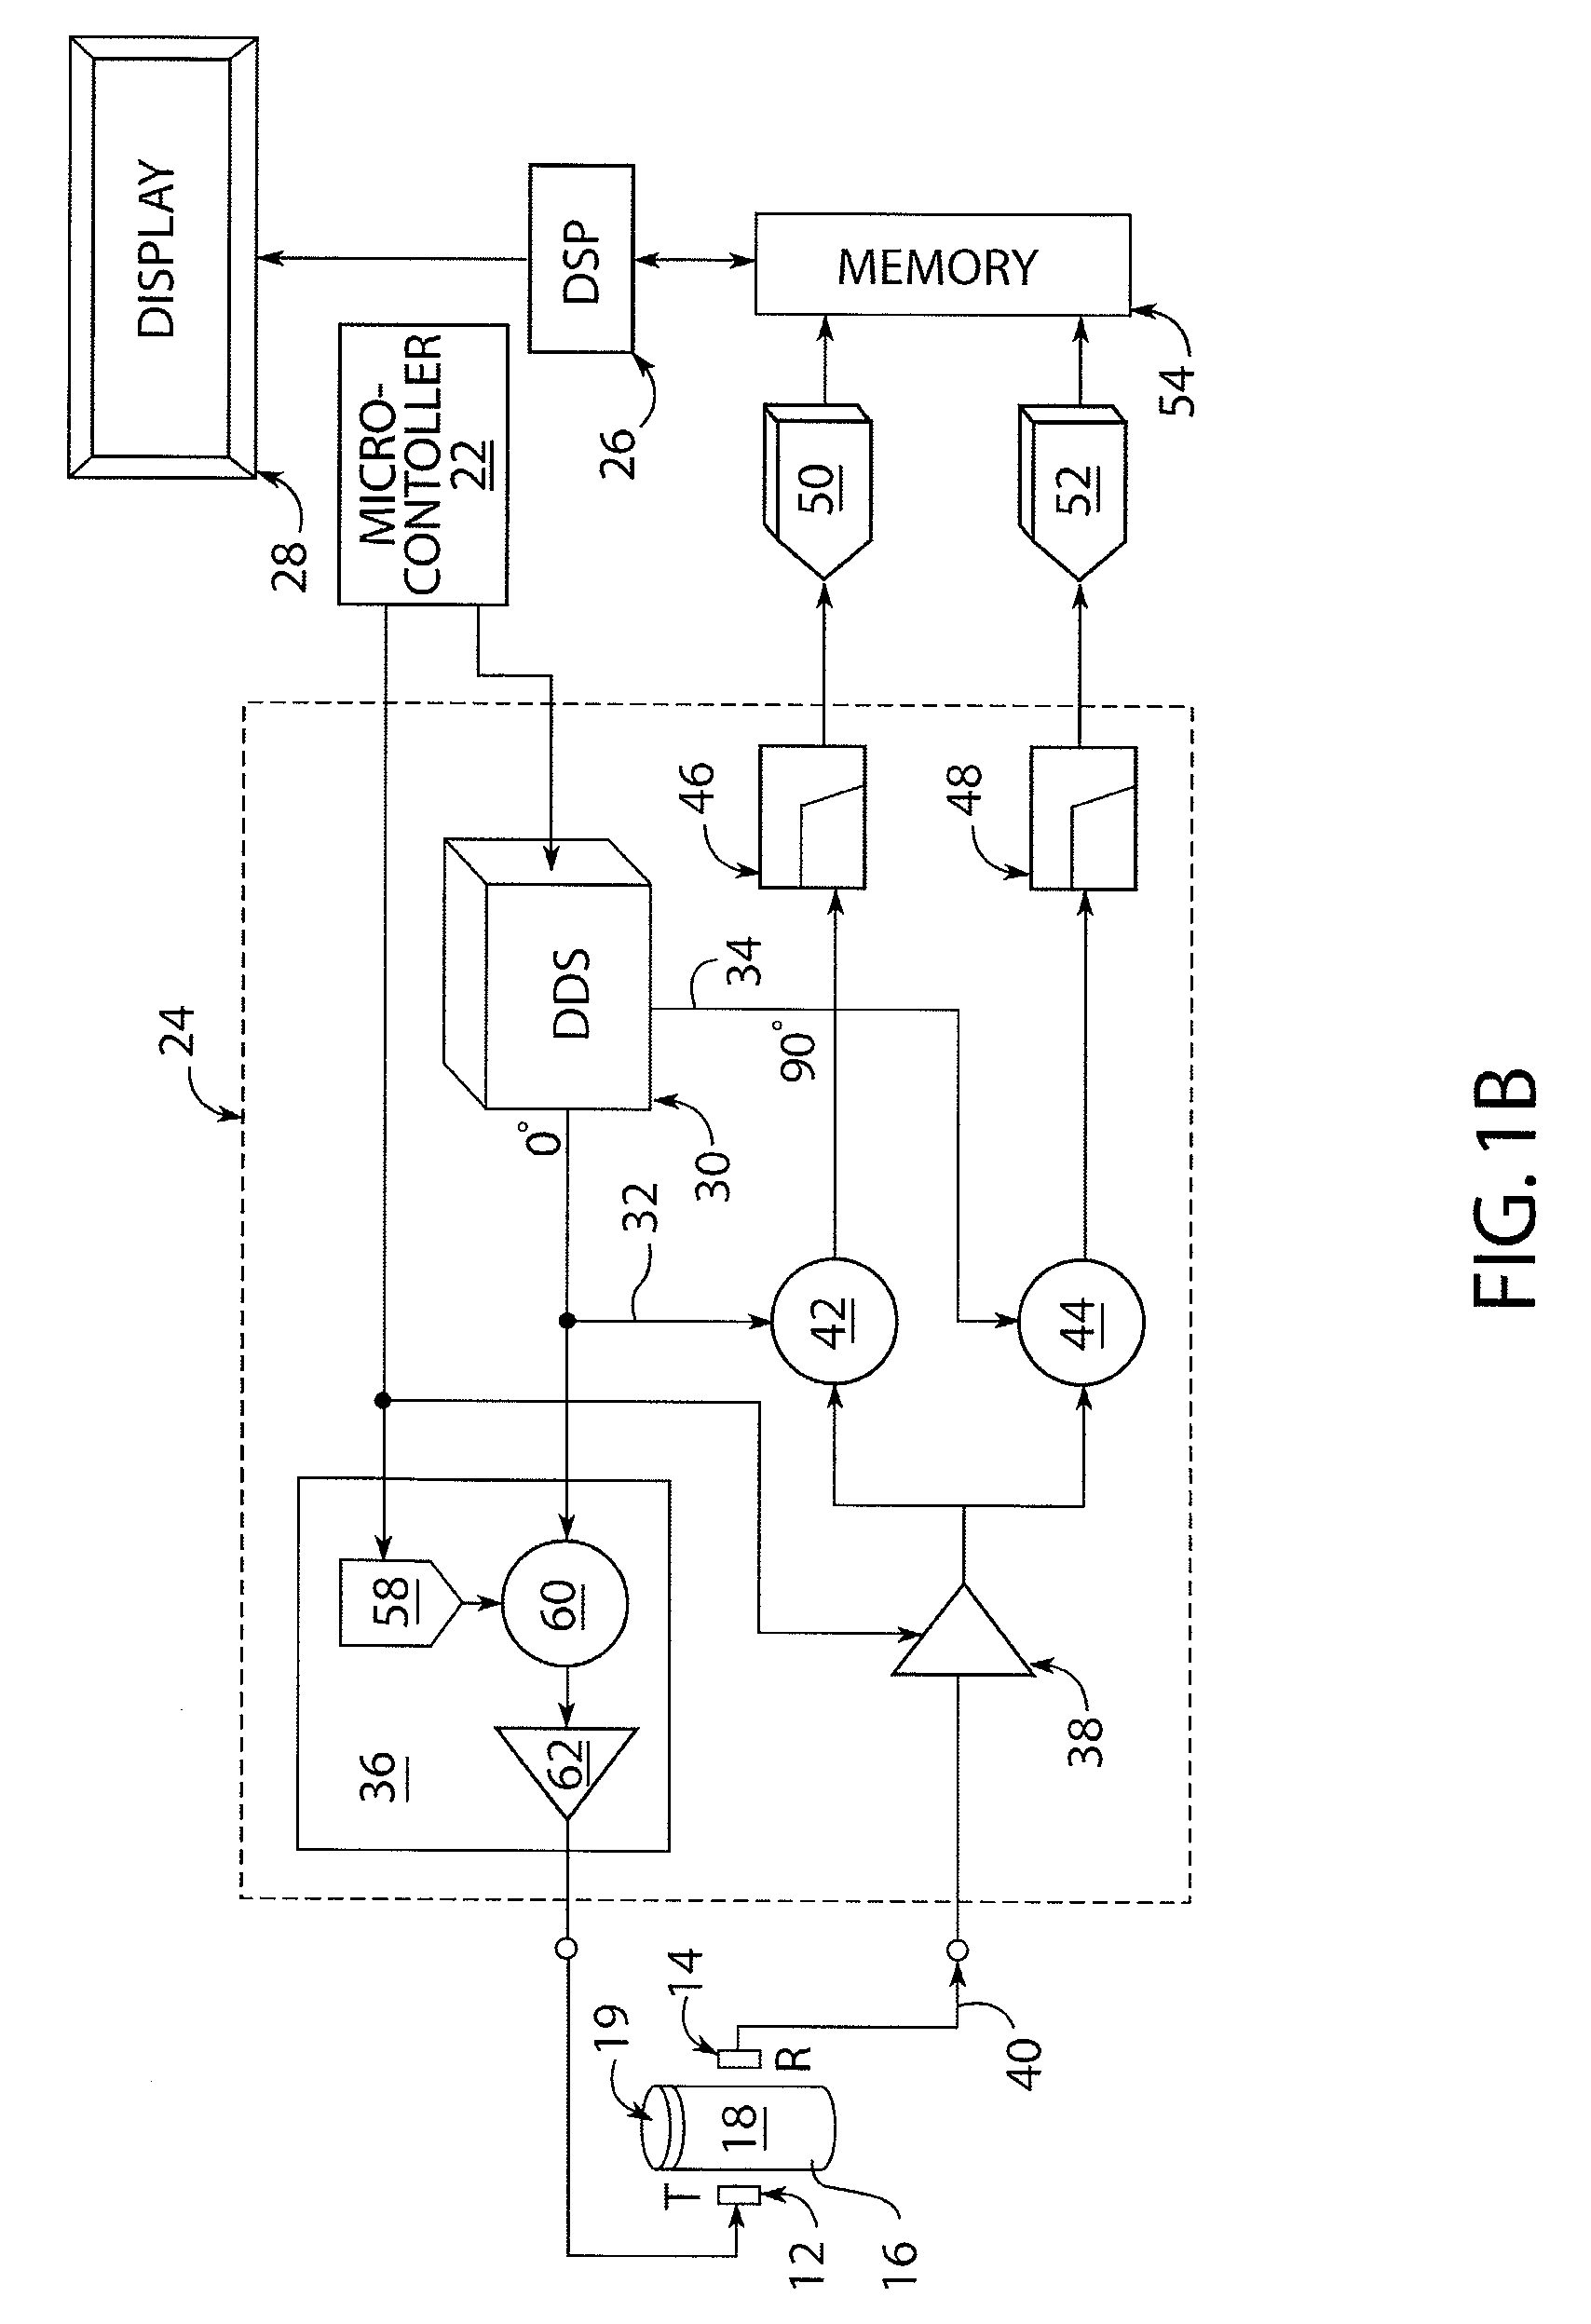 Non-contact fluid characterization in containers using ultrasonic waves